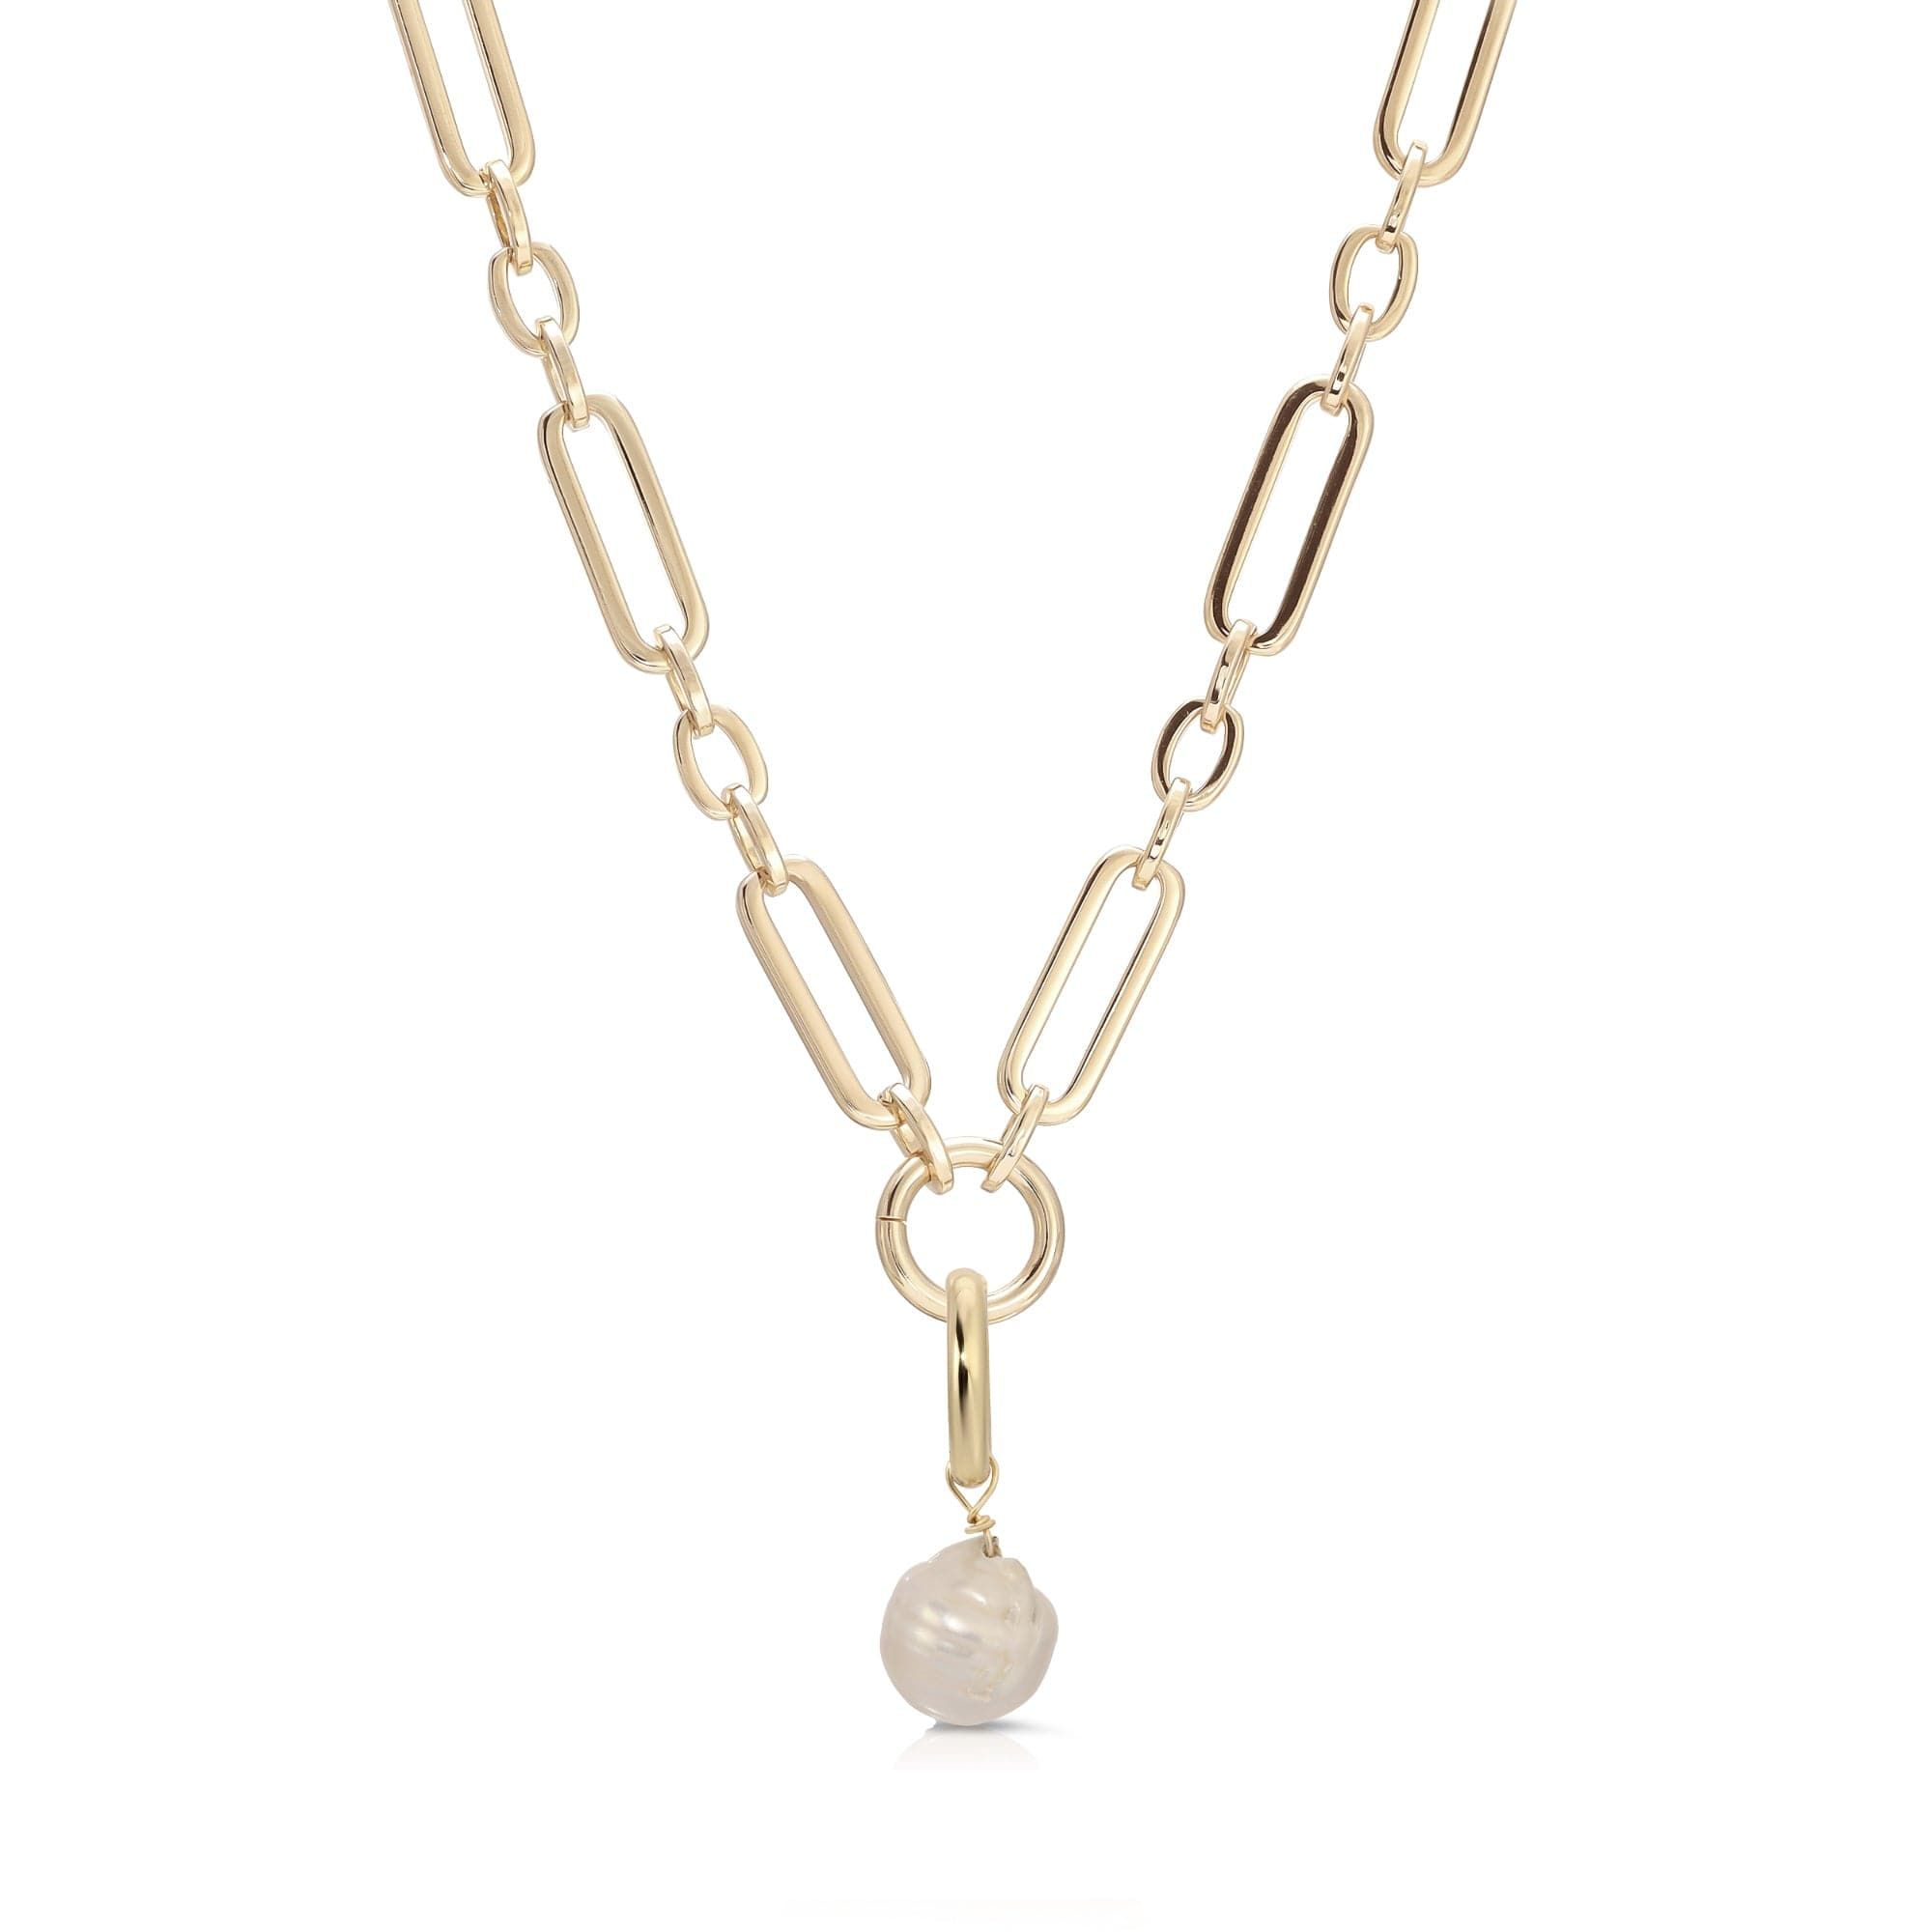 a gold chain with a white stone hanging from it